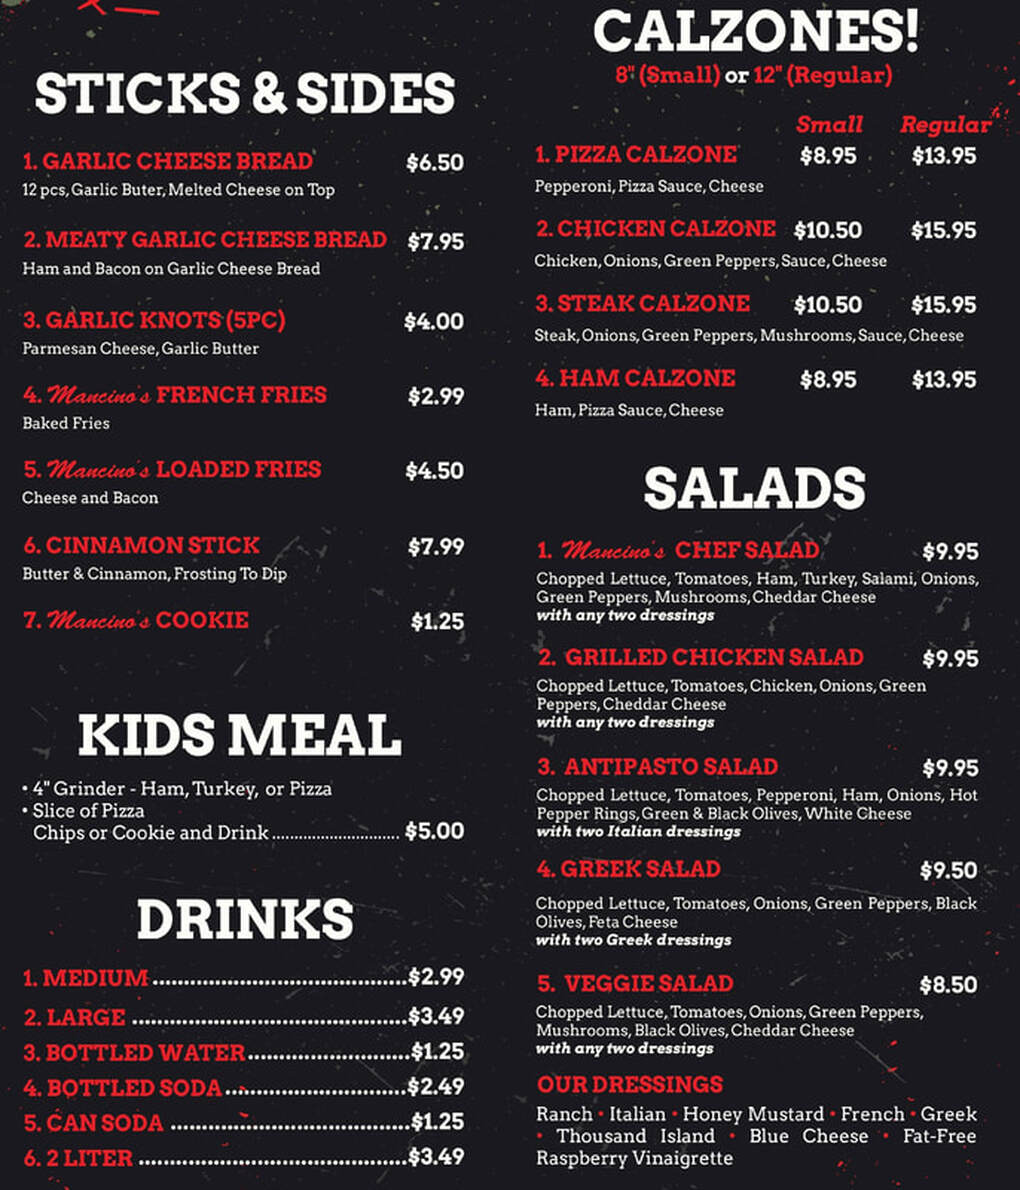 CALZONES! STICKS & SIDES 8° (Small) or 12